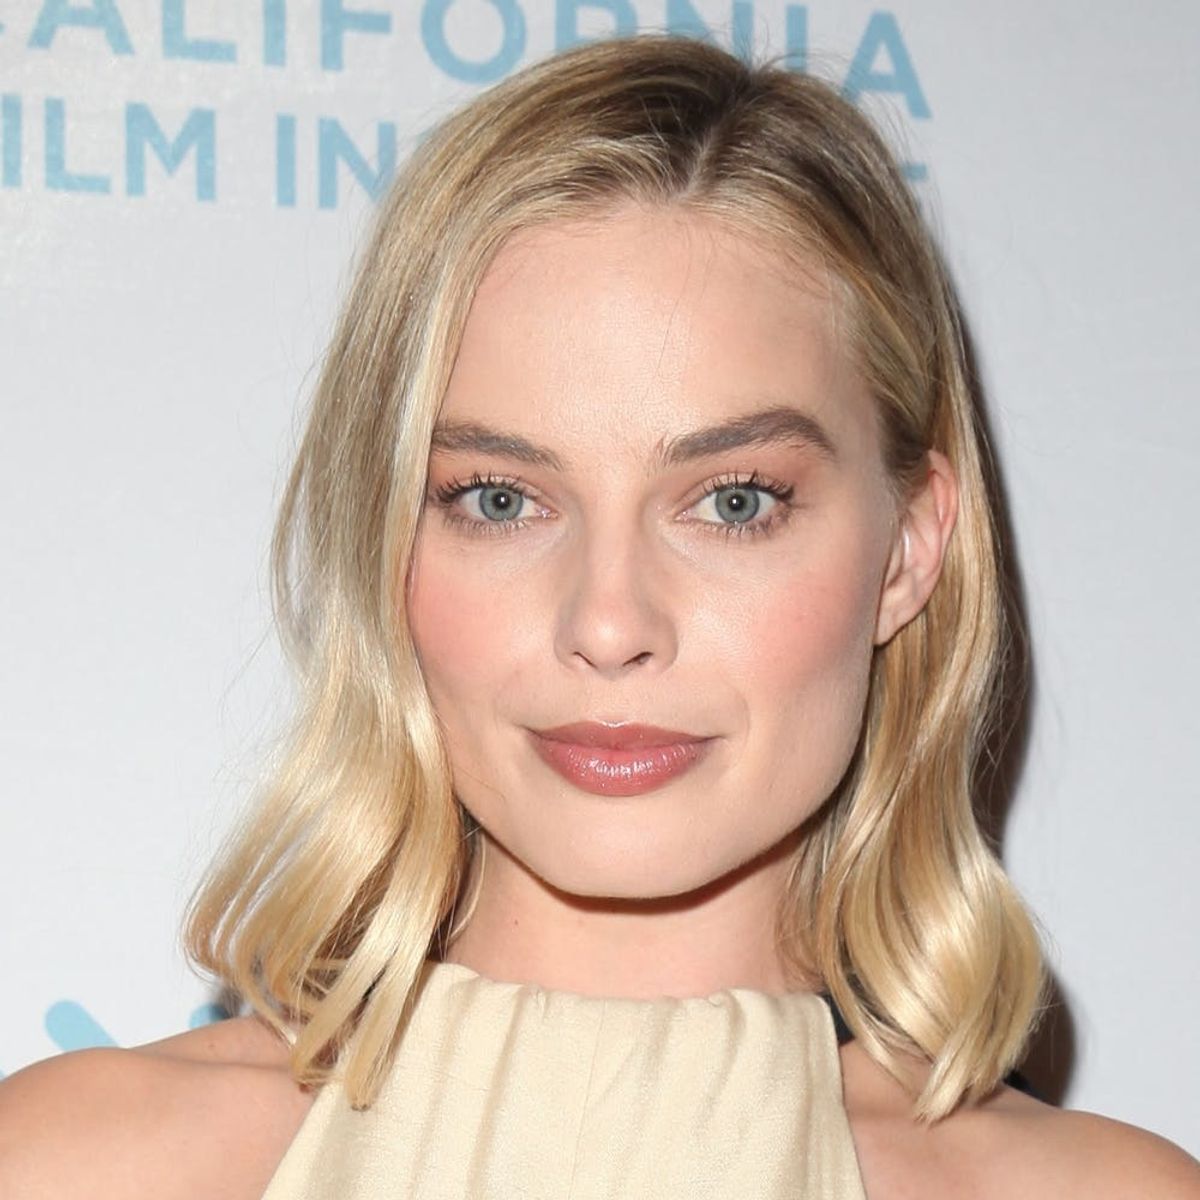 Margot Robbie Had the BEST Response to Off-Topic Questions About Her Marriage